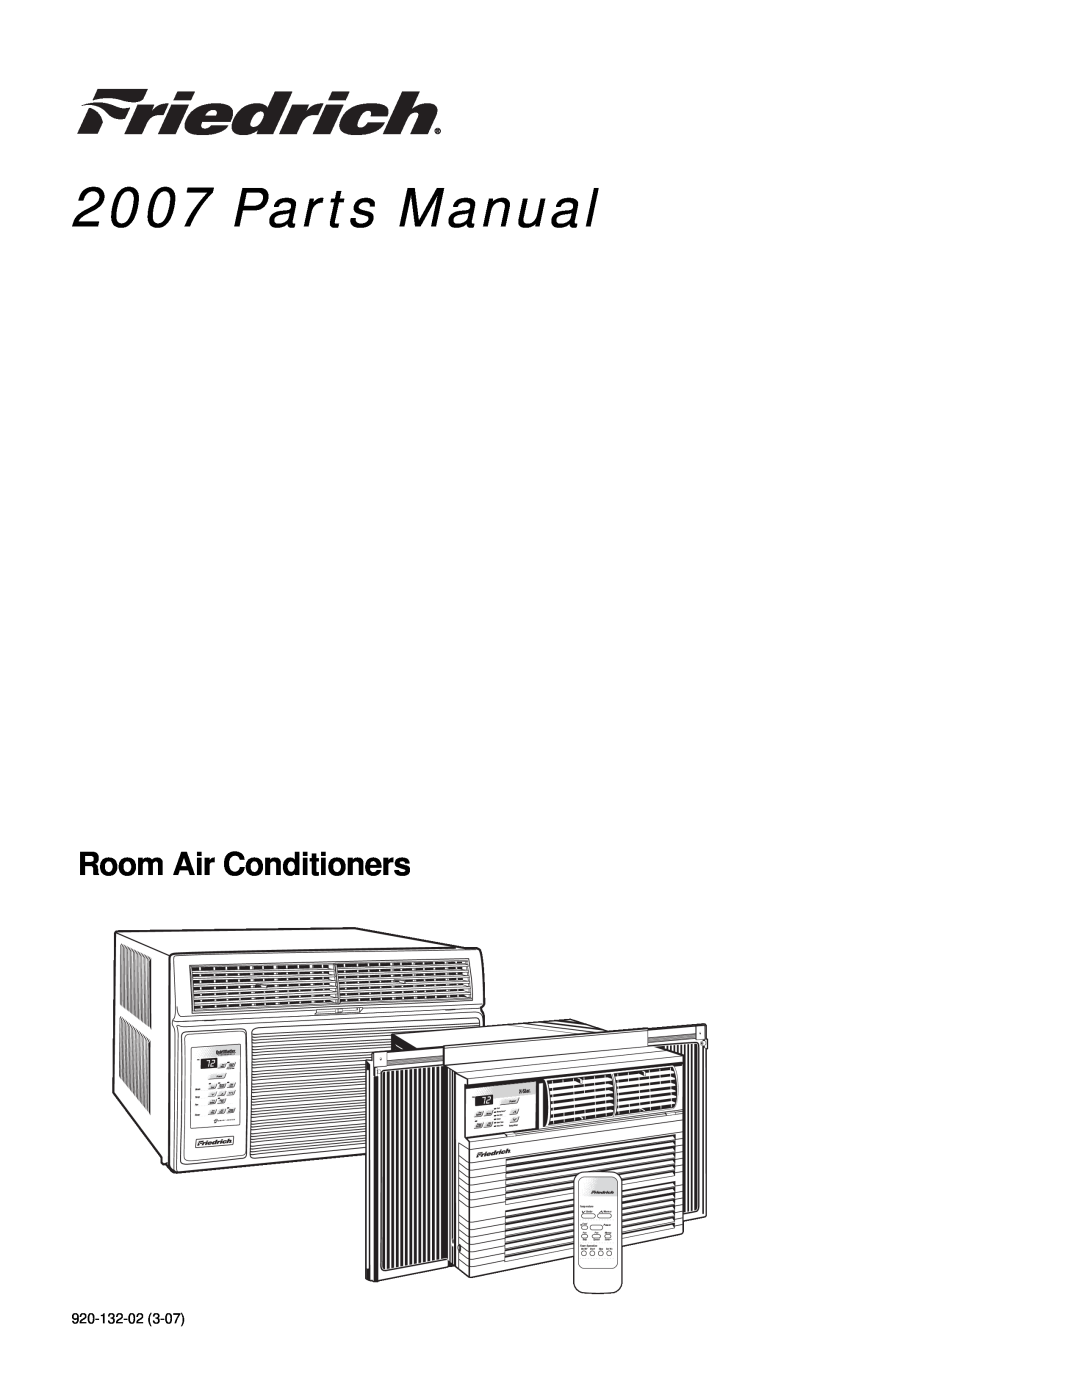 Friedrich Room Air Conditioners manual Parts Manual, Temperature Cooler Warmer, Power, Money, Only, Speed, Saver 